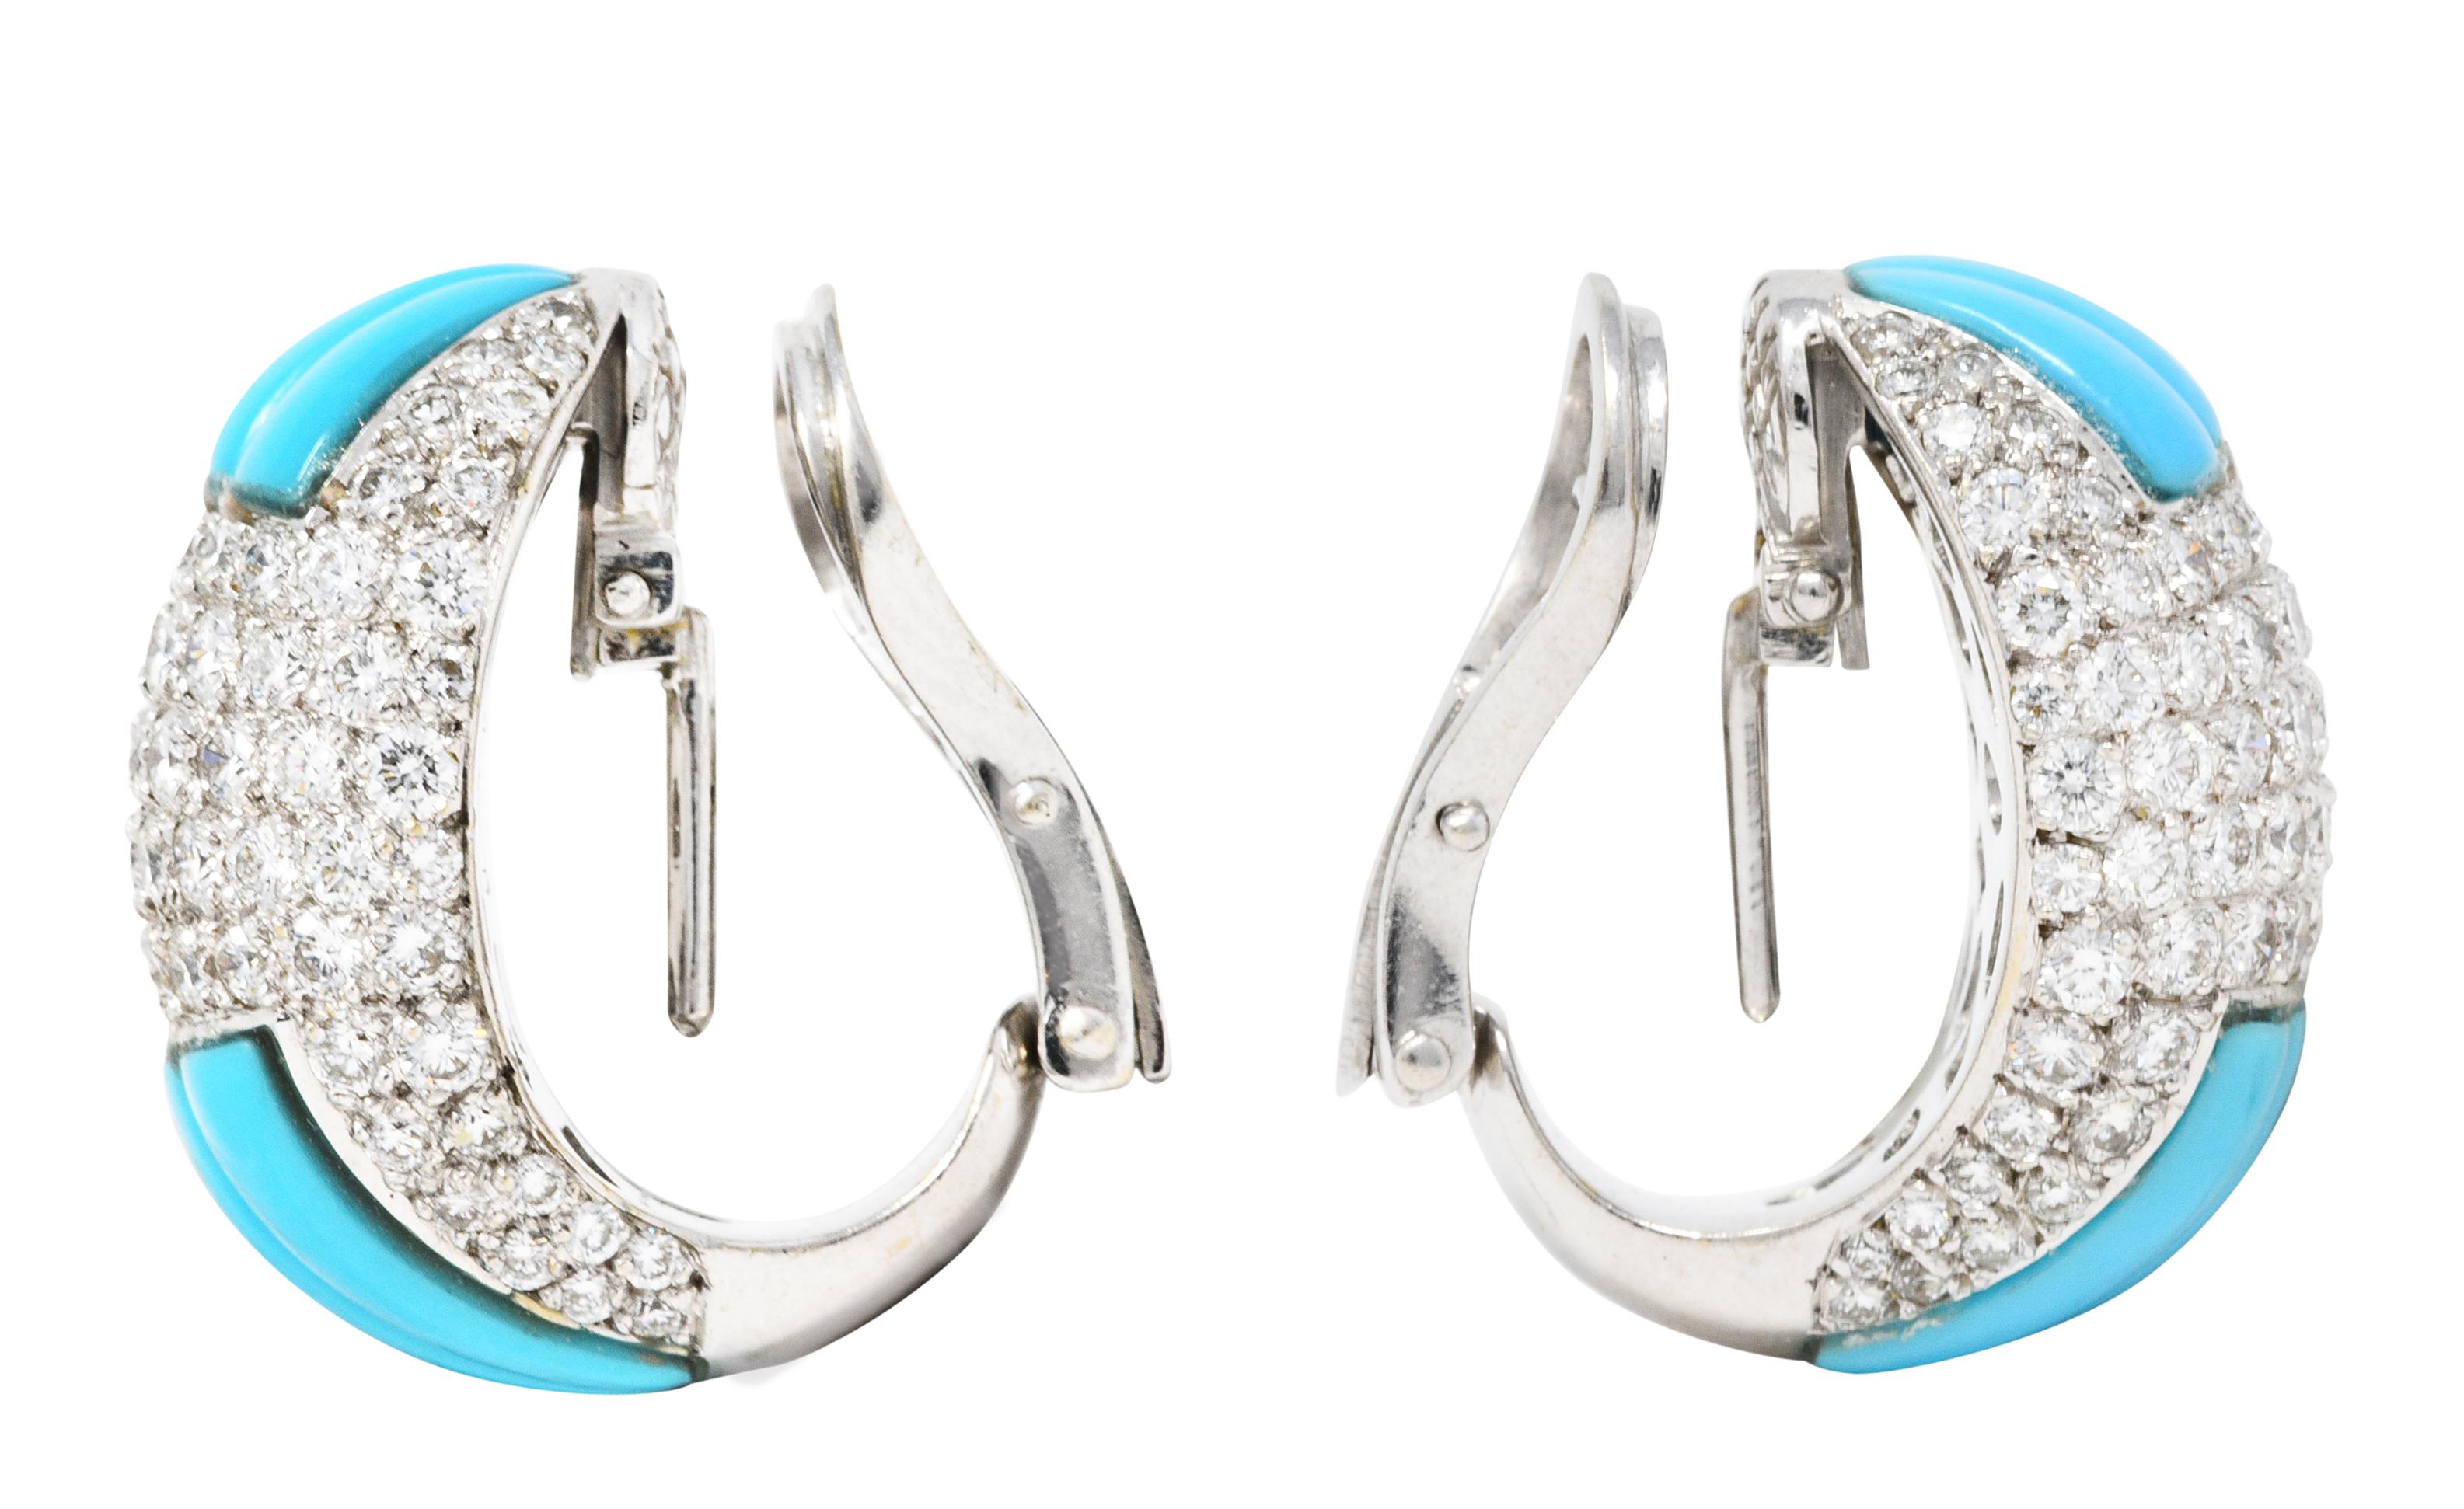 J hoop earrings are pavè set with round brilliant cut diamonds

Weighing in total approximately 4.00 carats with G/H color and VS clarity

Flanked North and South by fine robin's egg blue turquoise with deeply carved fluting

Completed by optional